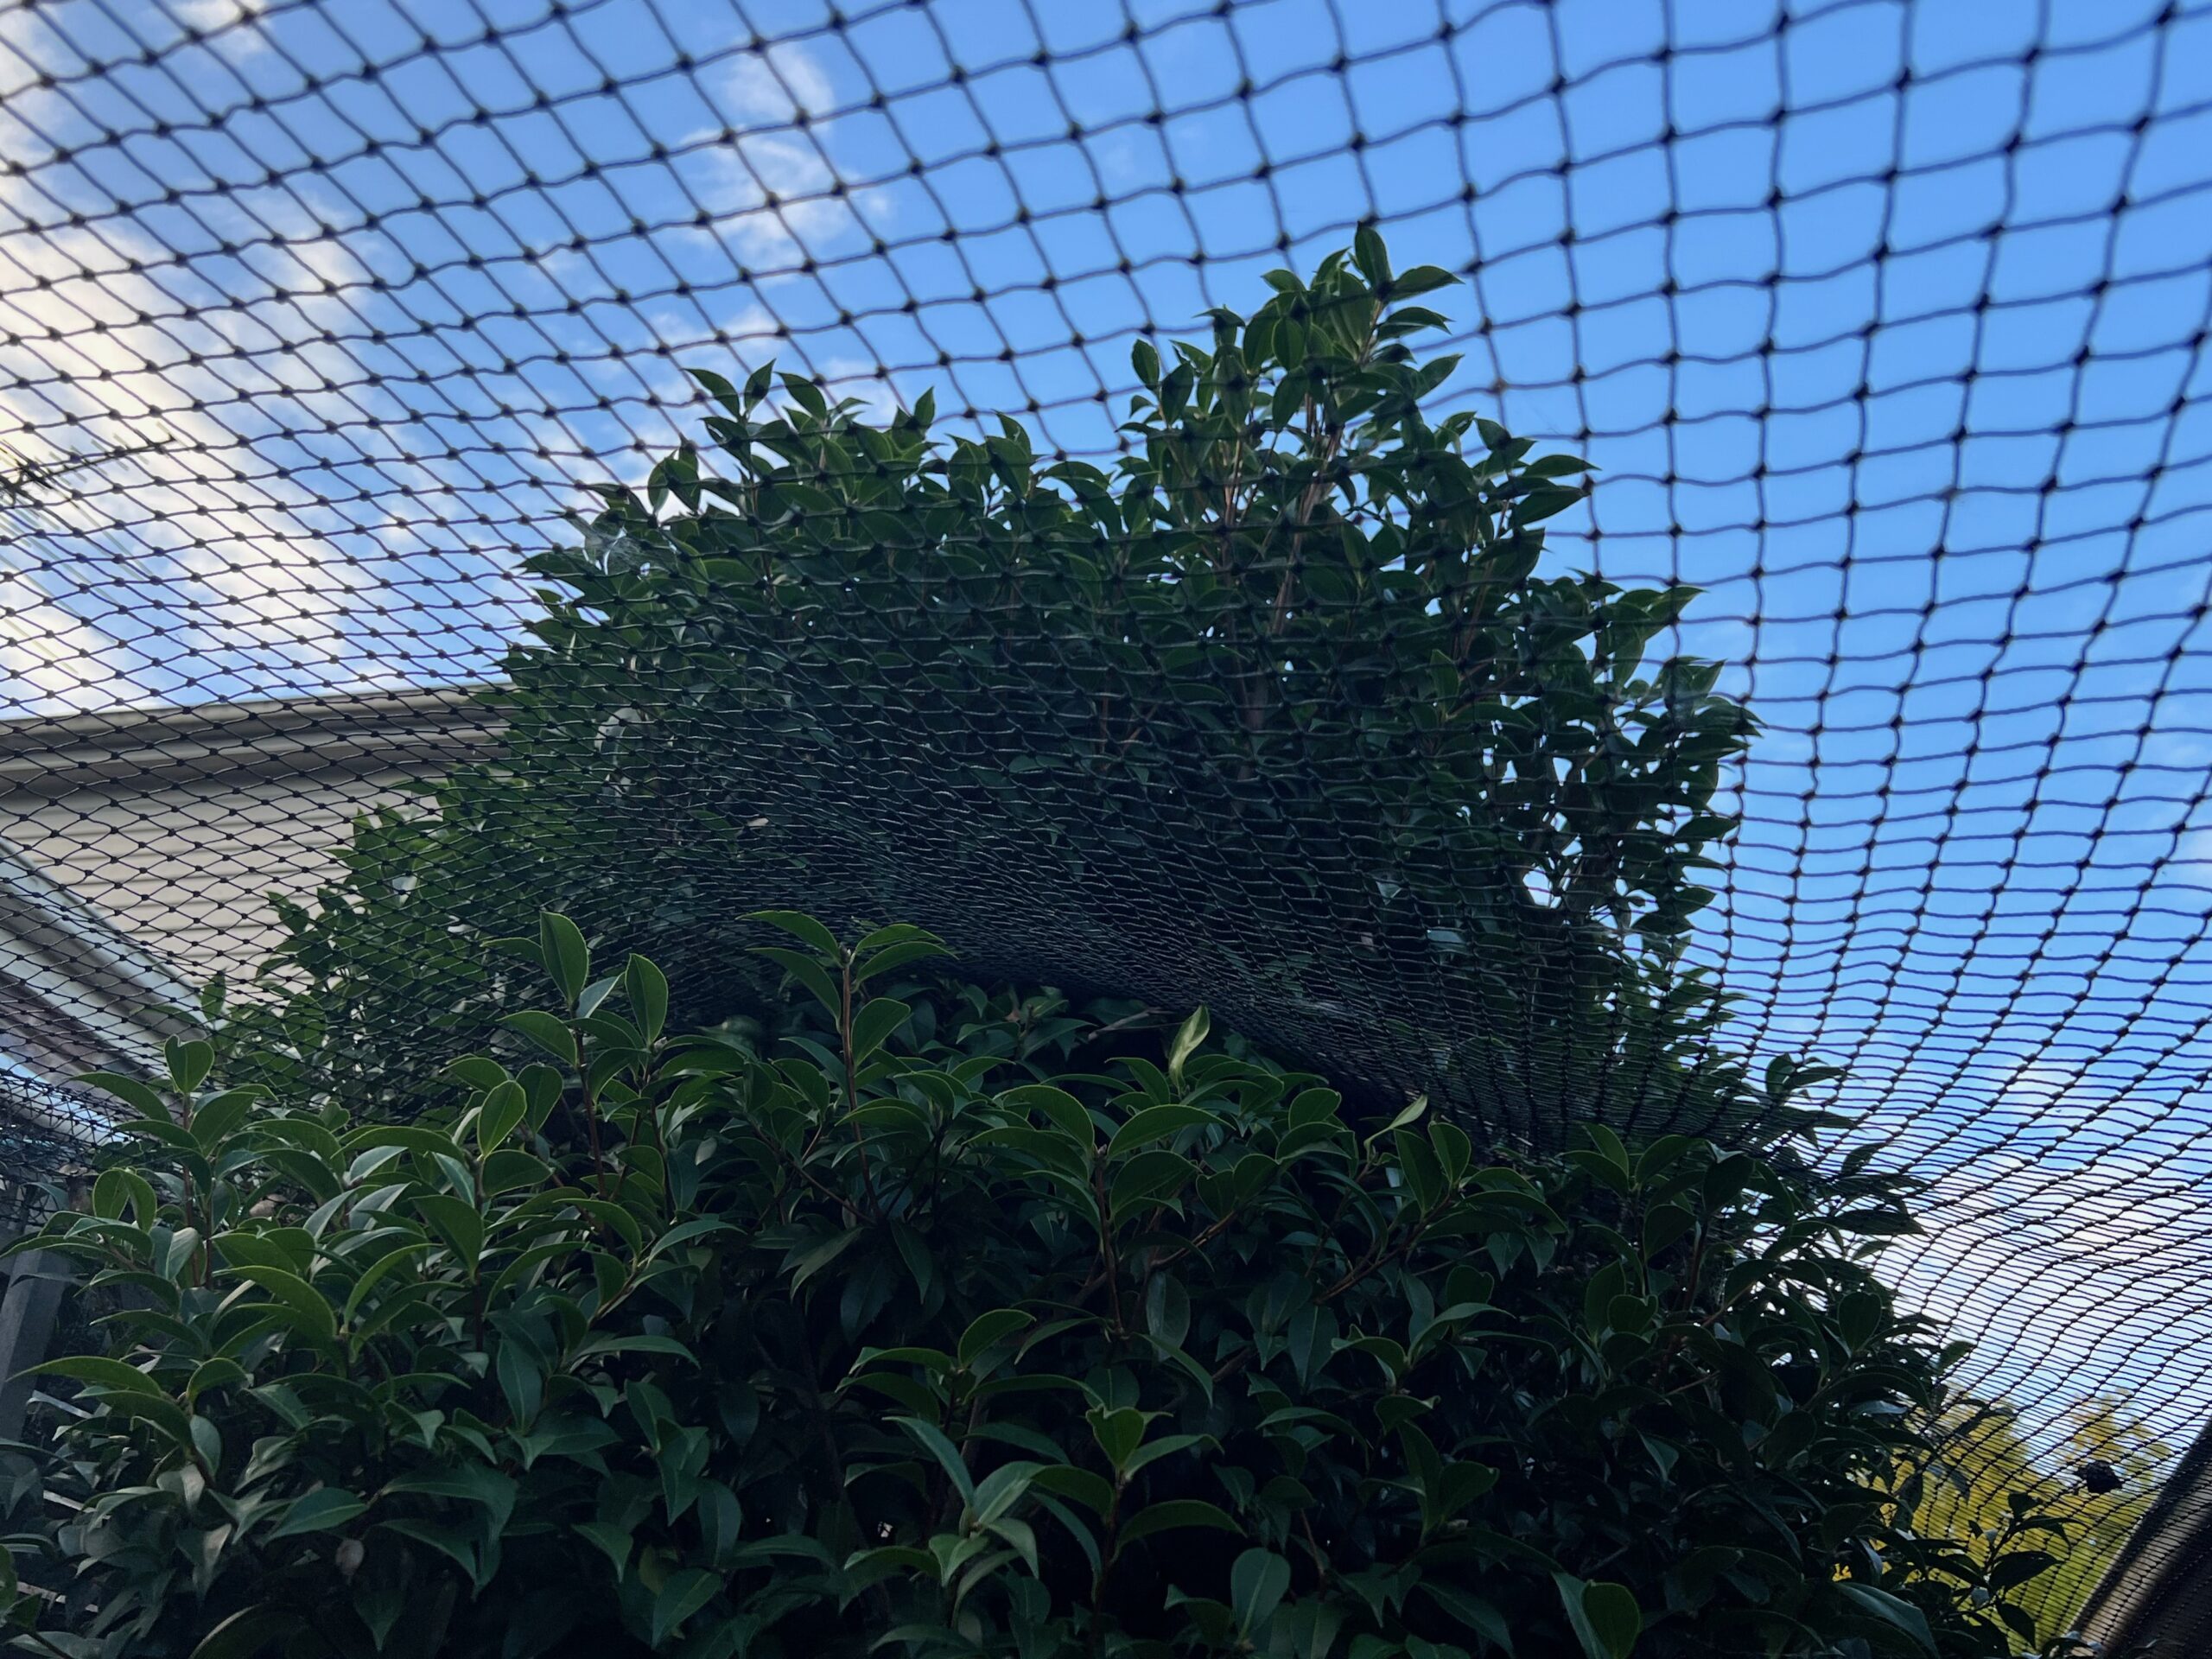 Trees and cat netting